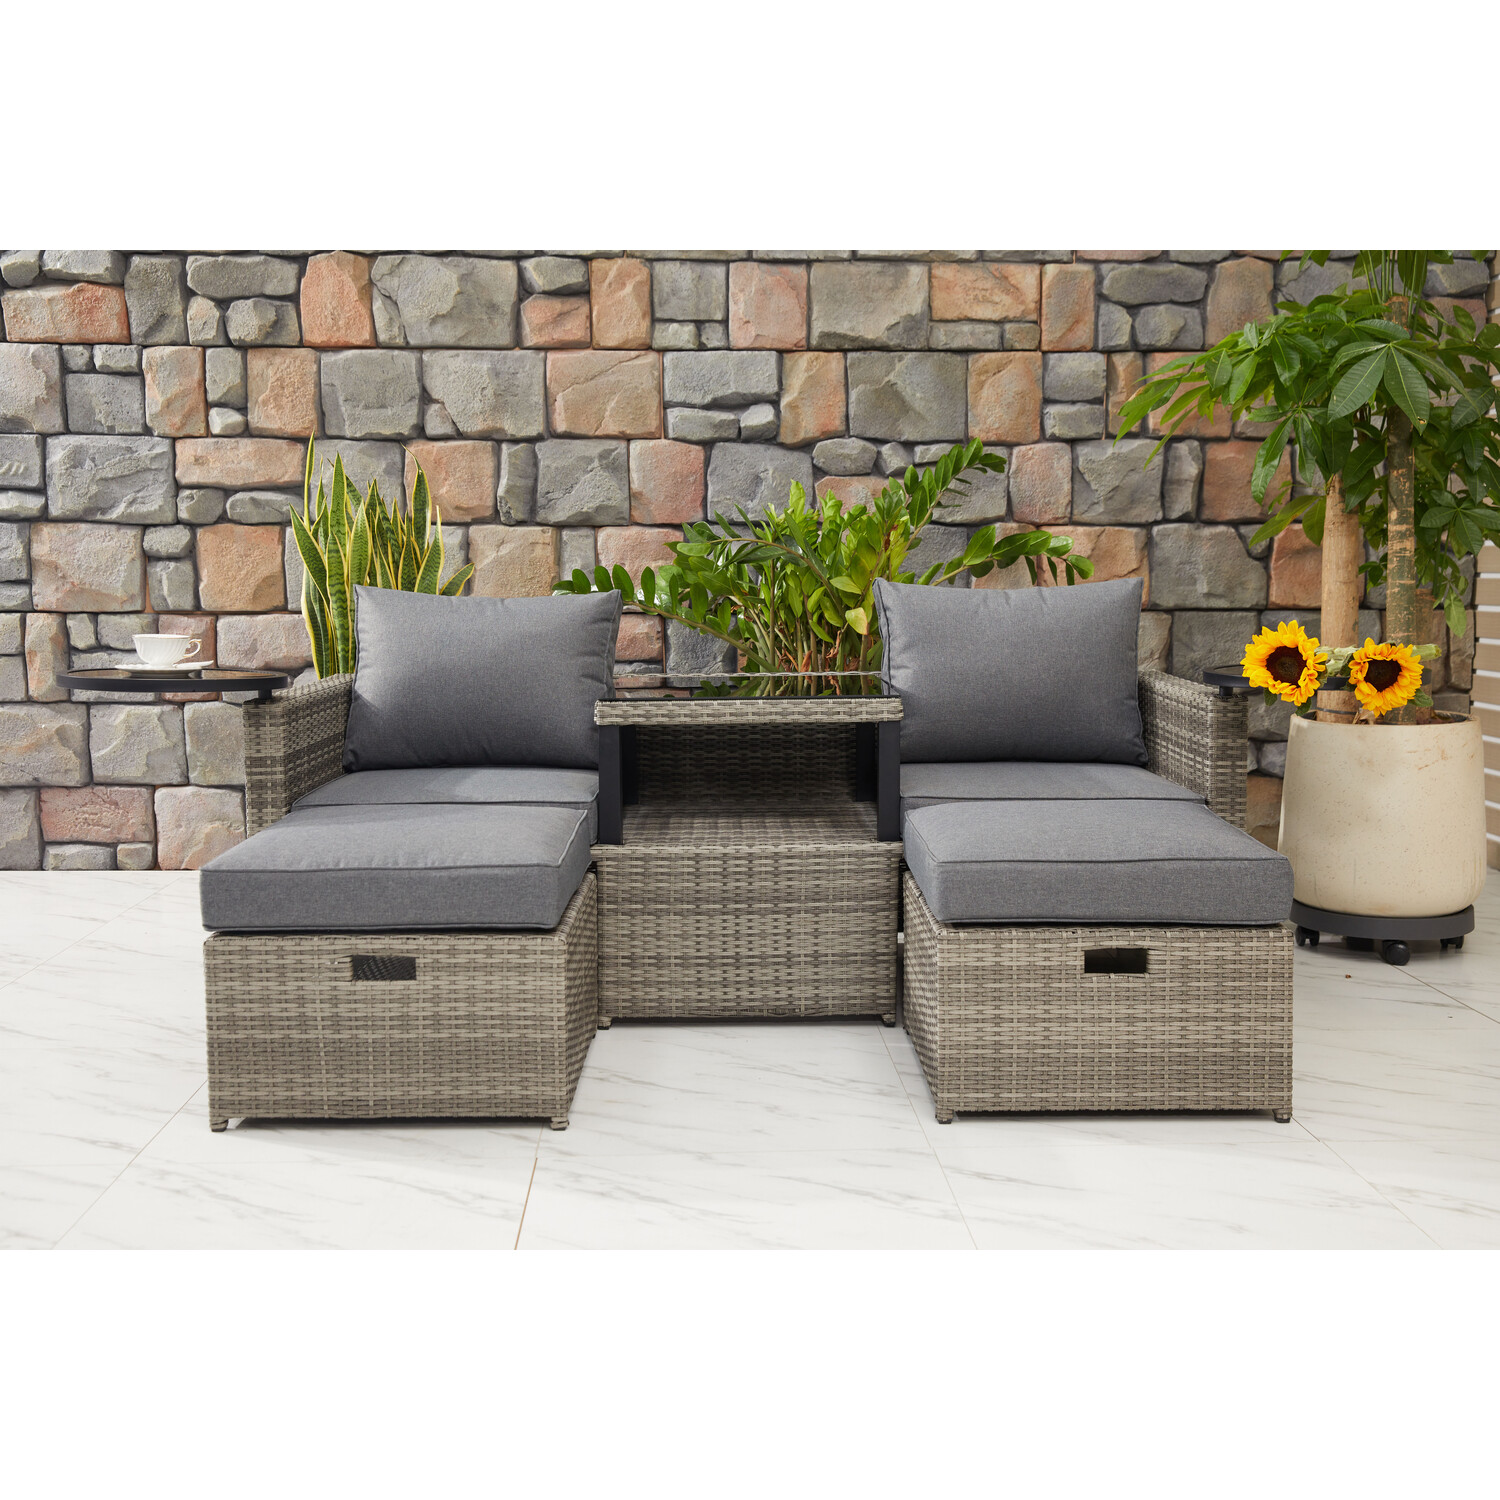 Malay Deluxe Malay New Hampshire 2 Seater Natural Transformer Patio Set Image 13